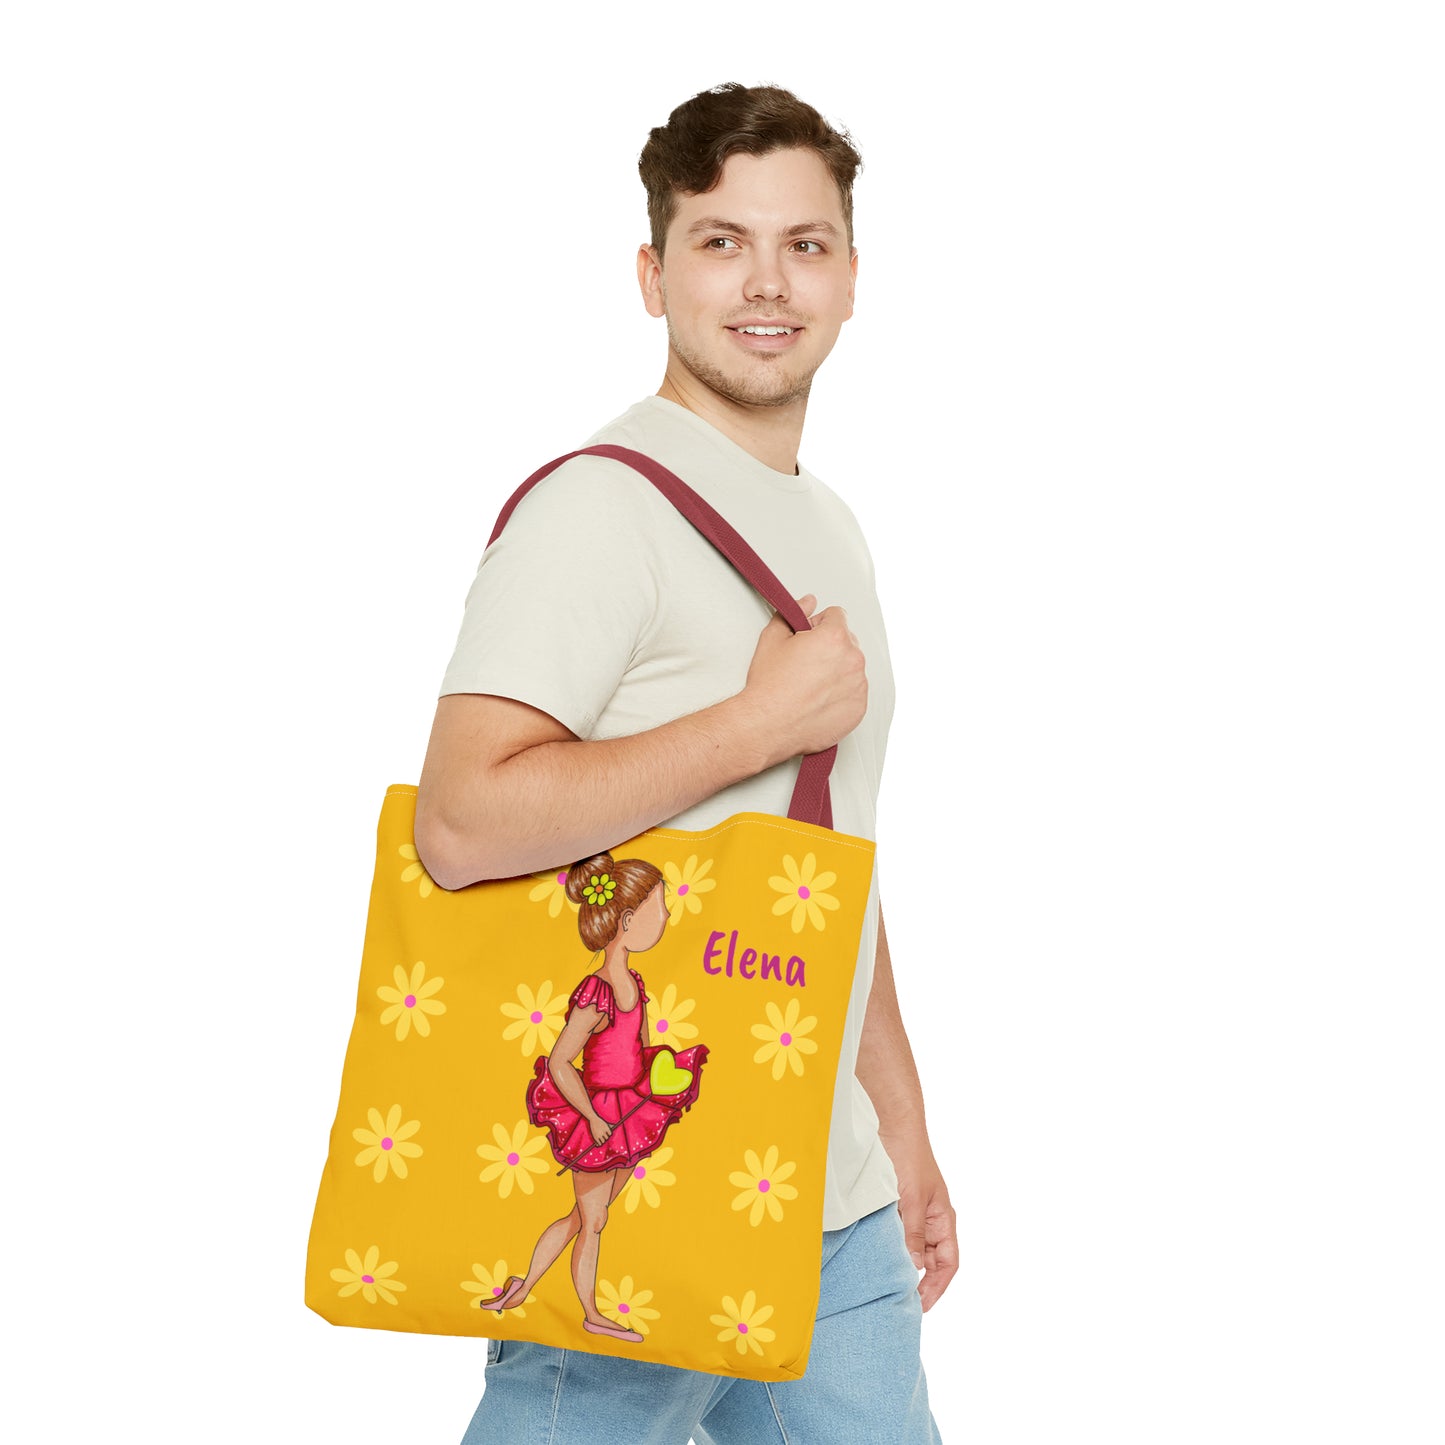 a man holding a yellow bag with a picture of a woman on it